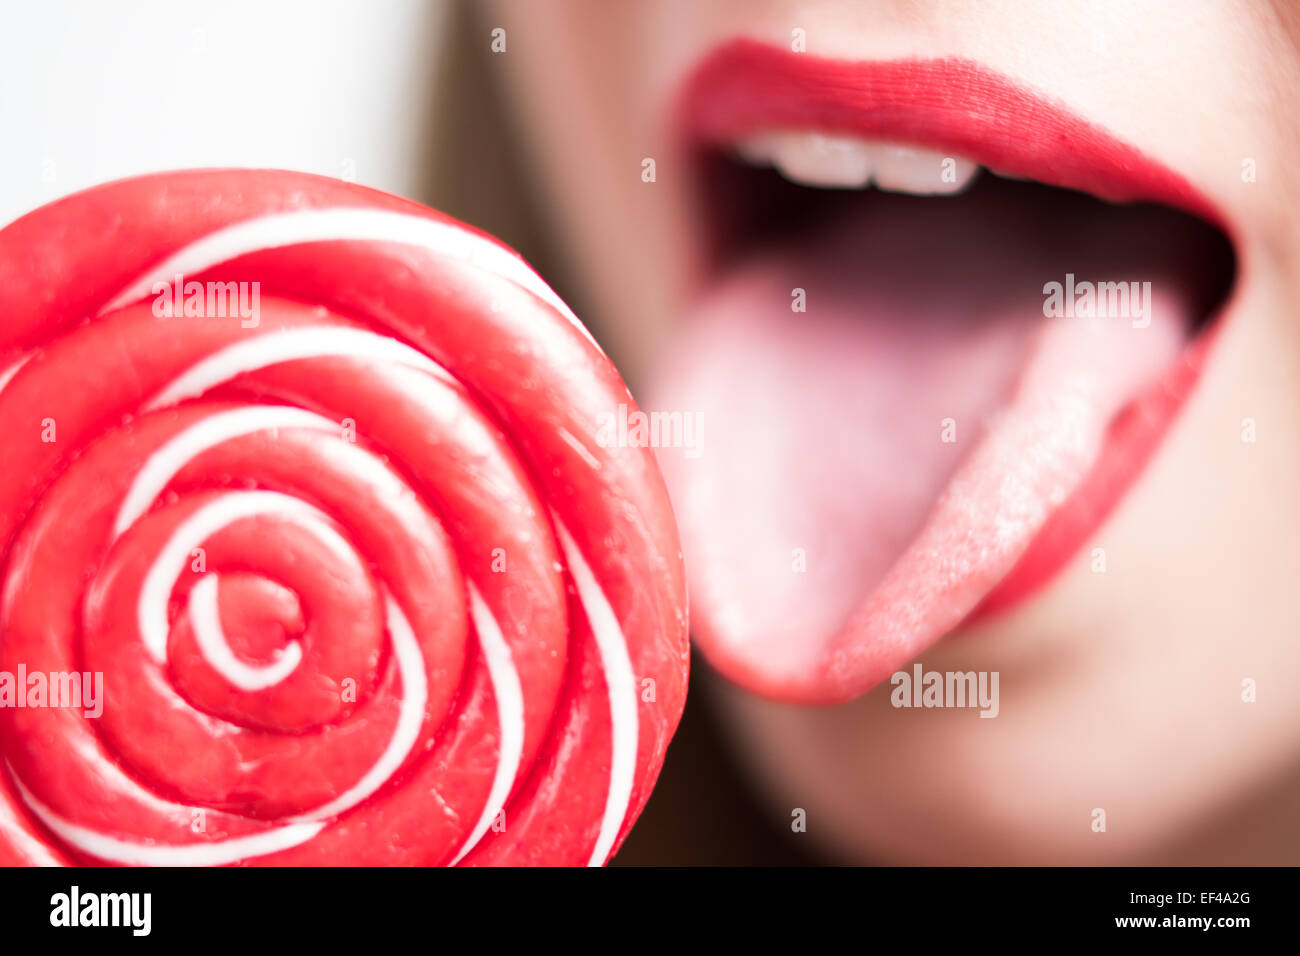 young woman's lips and a lollipop Stock Photo